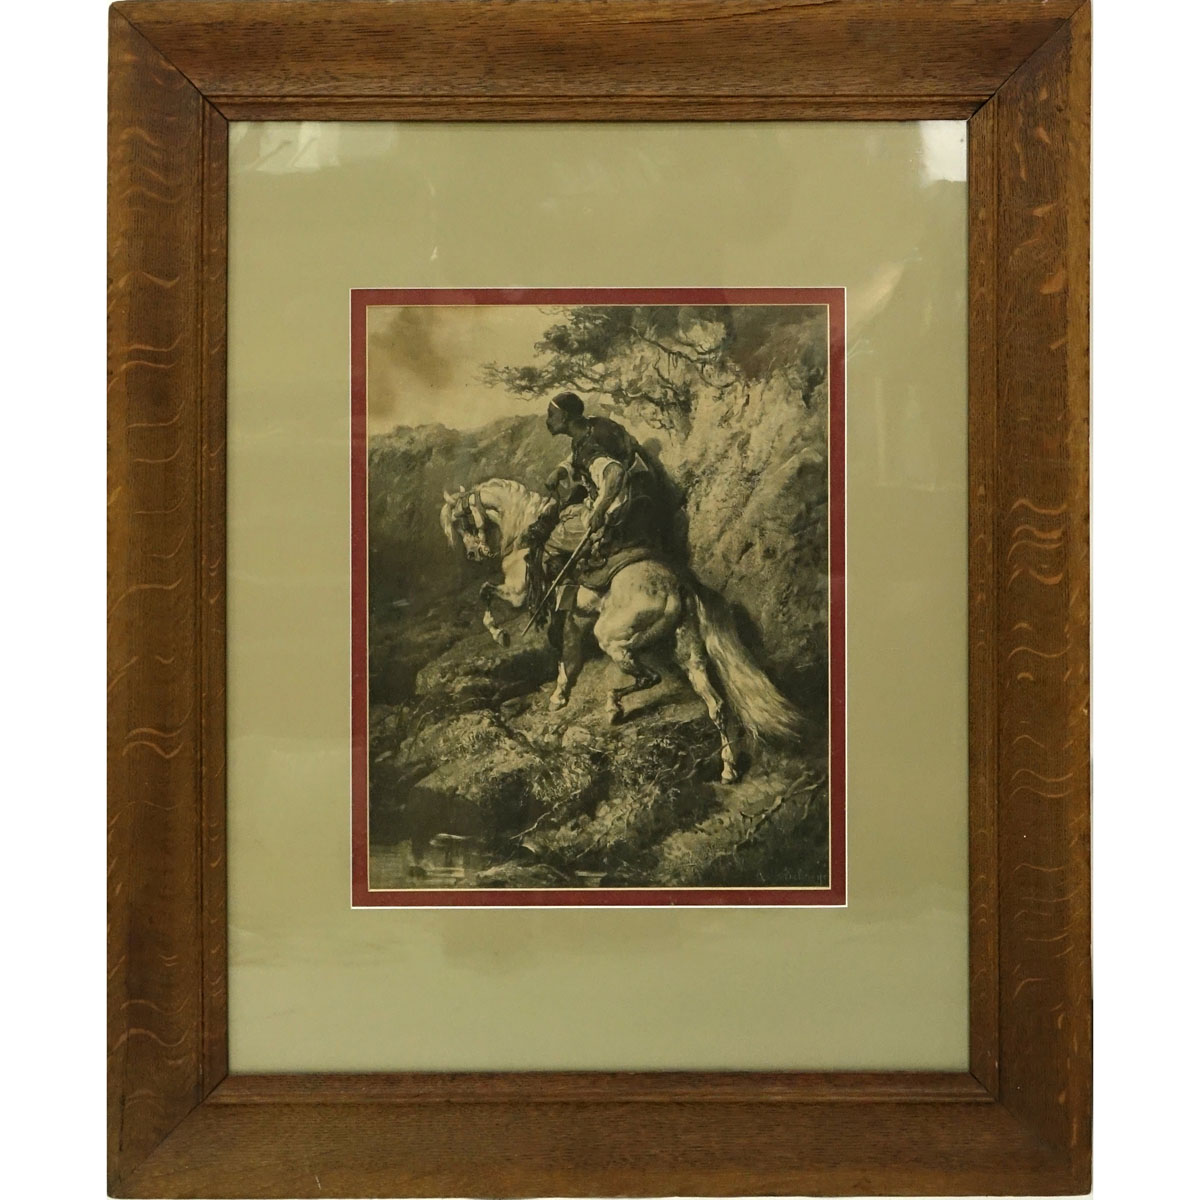 Adolph Schreyer, German  (1828 - 1899) Sepia Tone Lithograph Print, Bedouin on Horseback, Signed in the Plate. Small stain to top left corner.